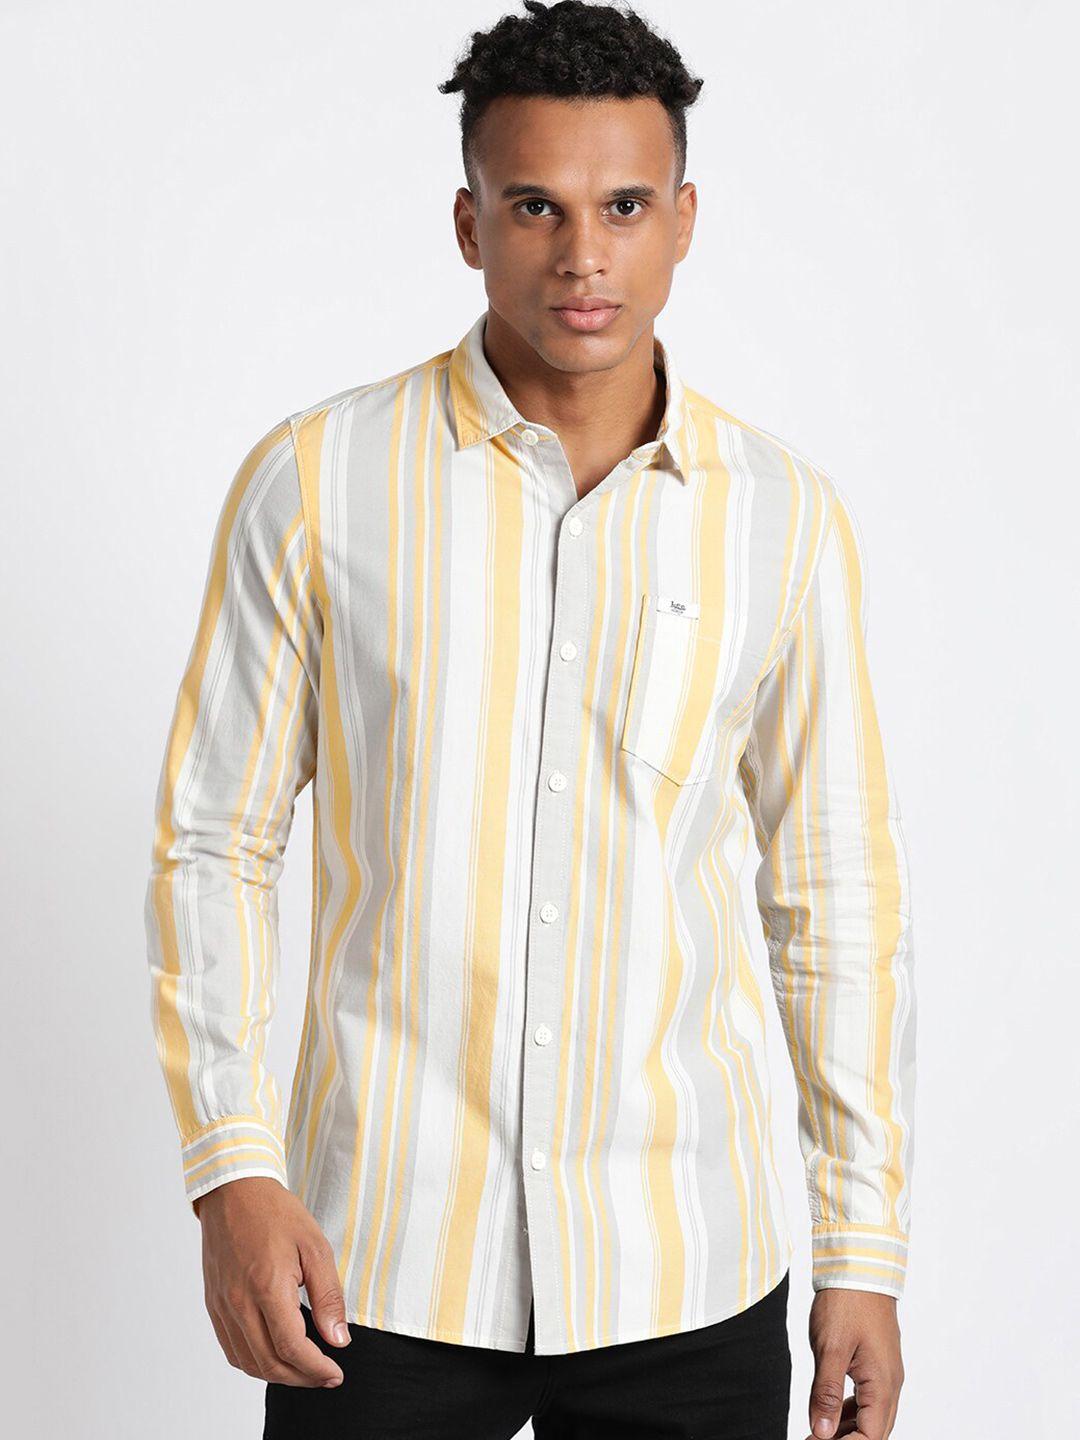 lee spread collar slim fit striped casual cotton shirt